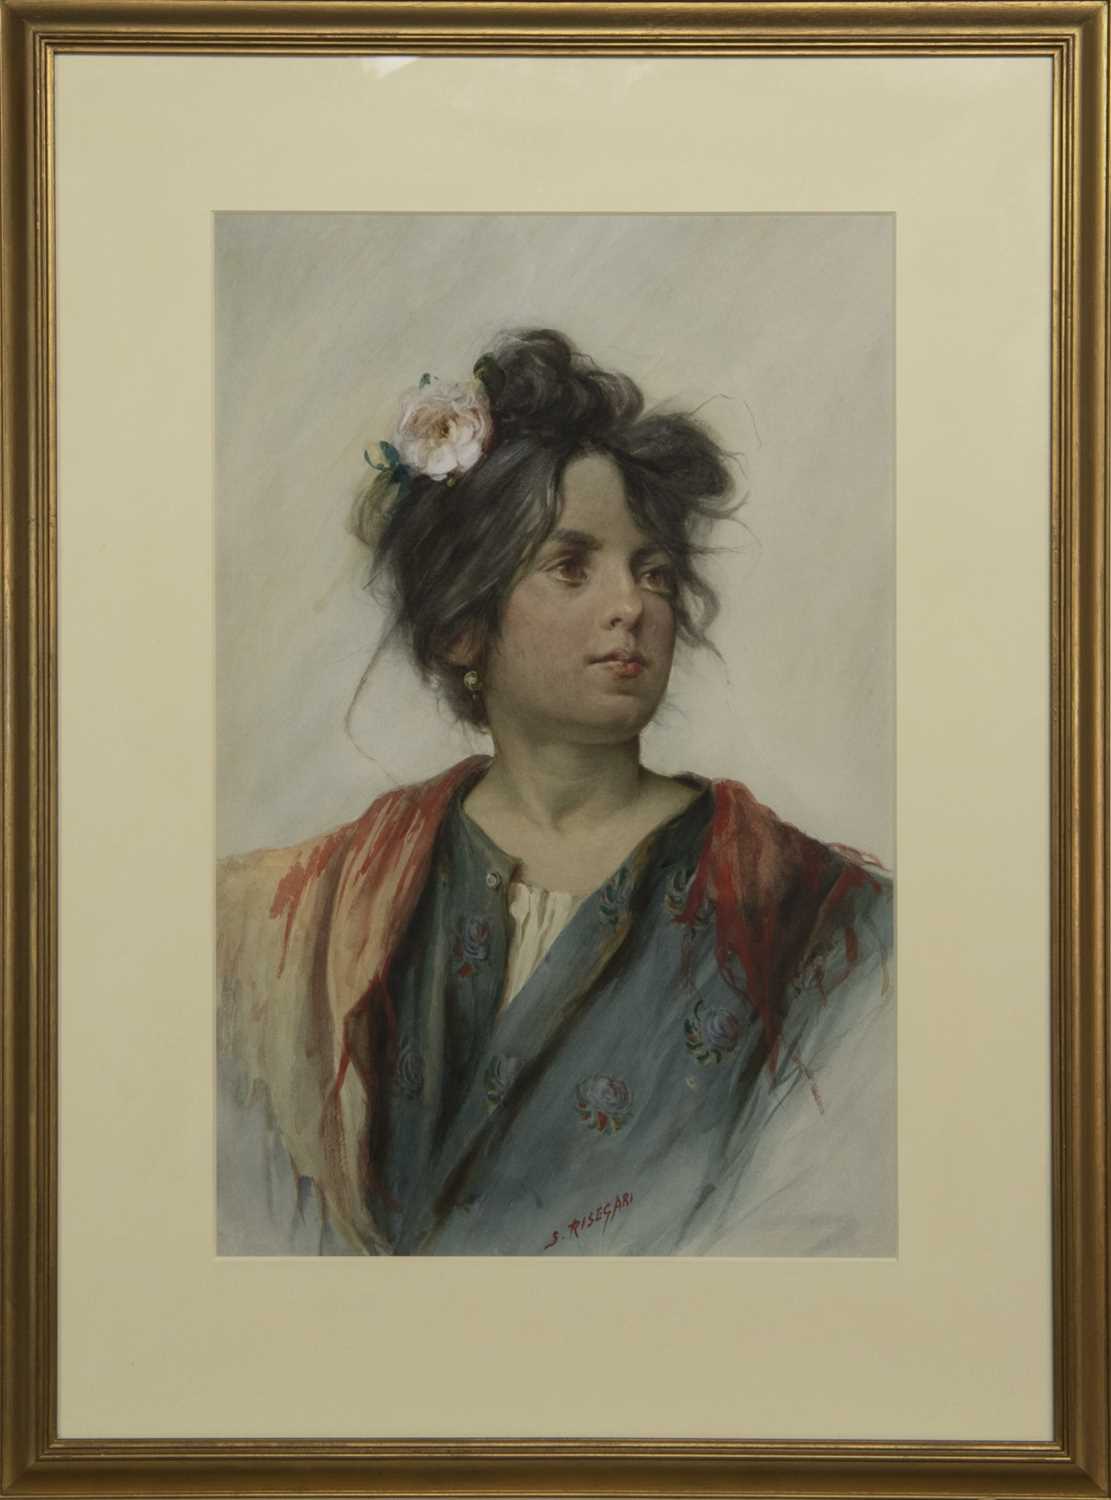 Lot 115 - A PAIR OF WATERCOLOUR PORTRAITS OF YOUNG LADIES  BY SILVIO RISEGARI